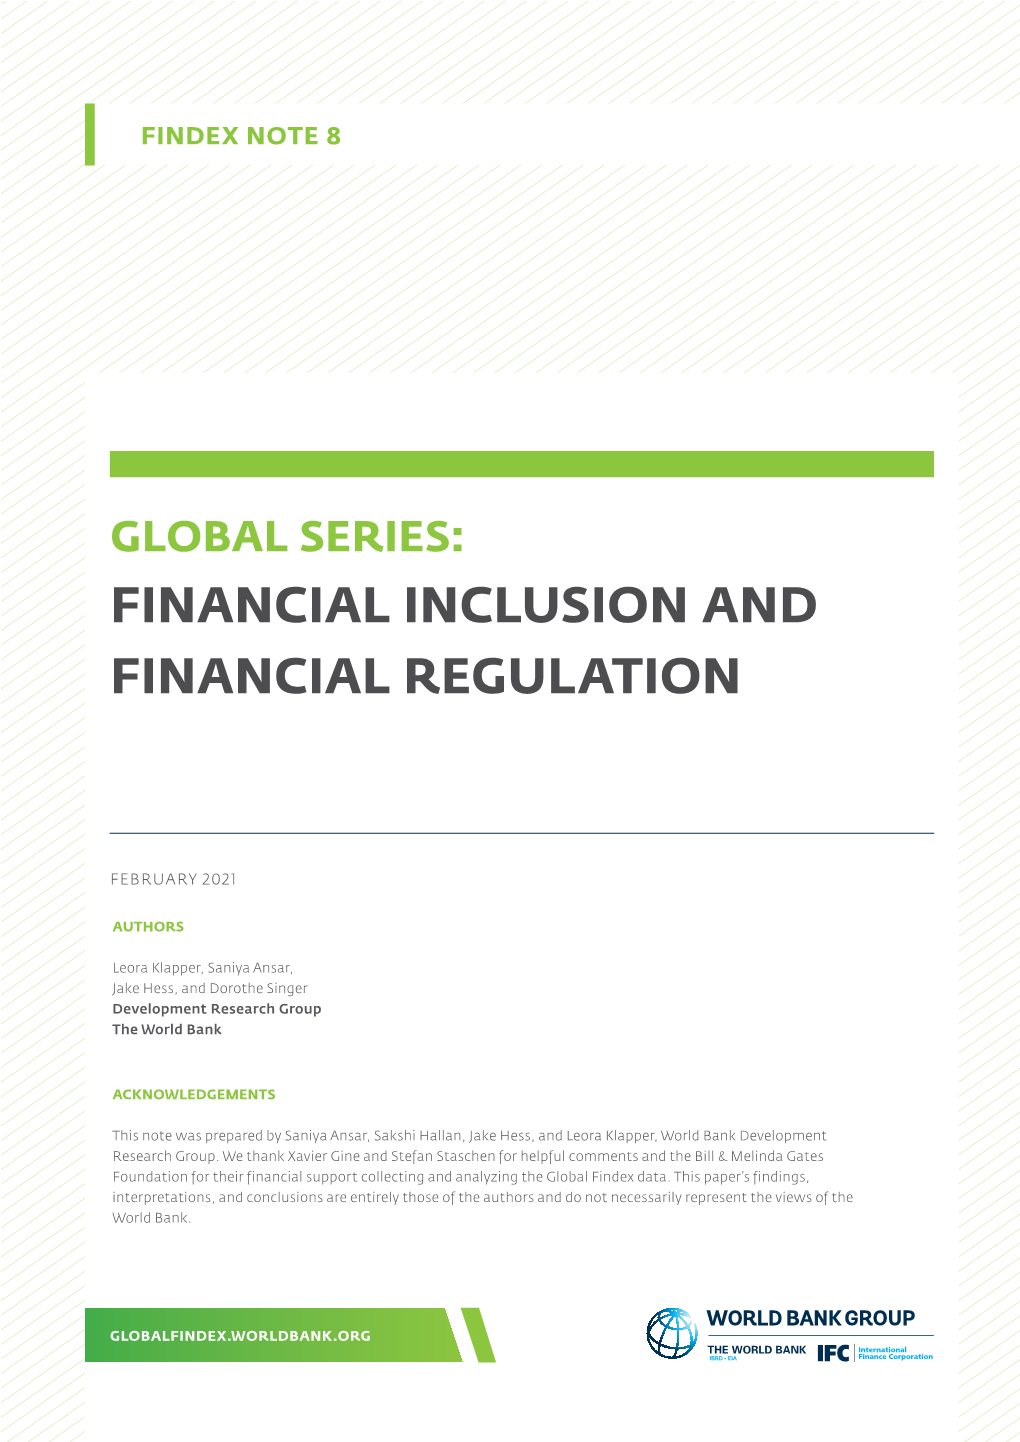 Financial Inclusion and Financial Regulation